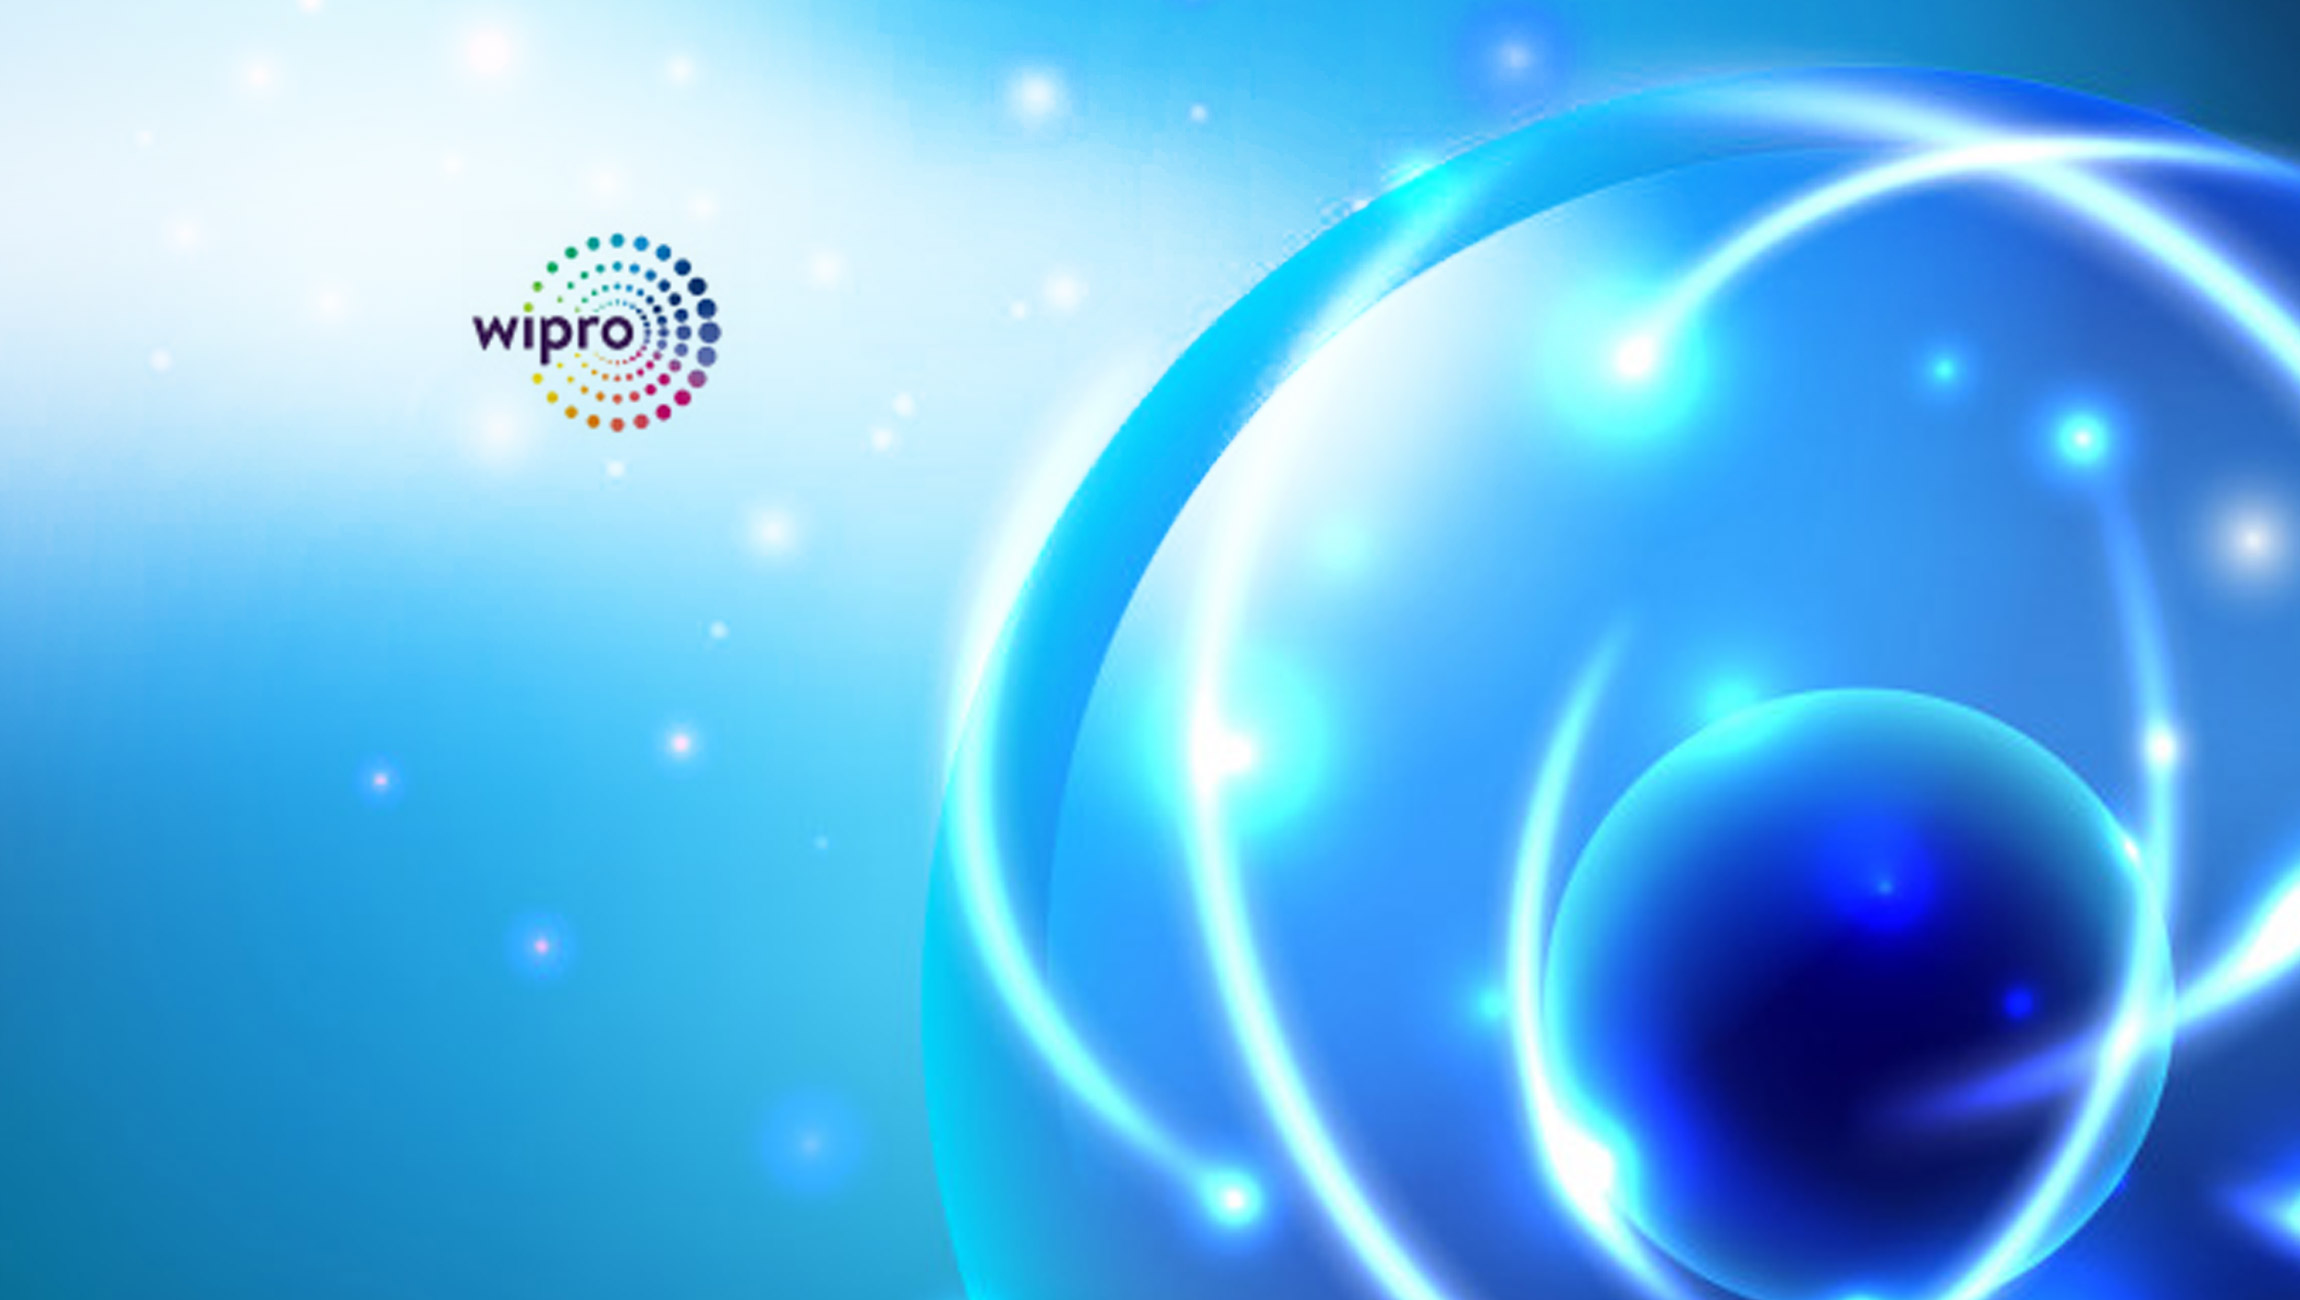 Wipro Positioned as a 'Leader' in Gartner 2020 Magic Quadrant